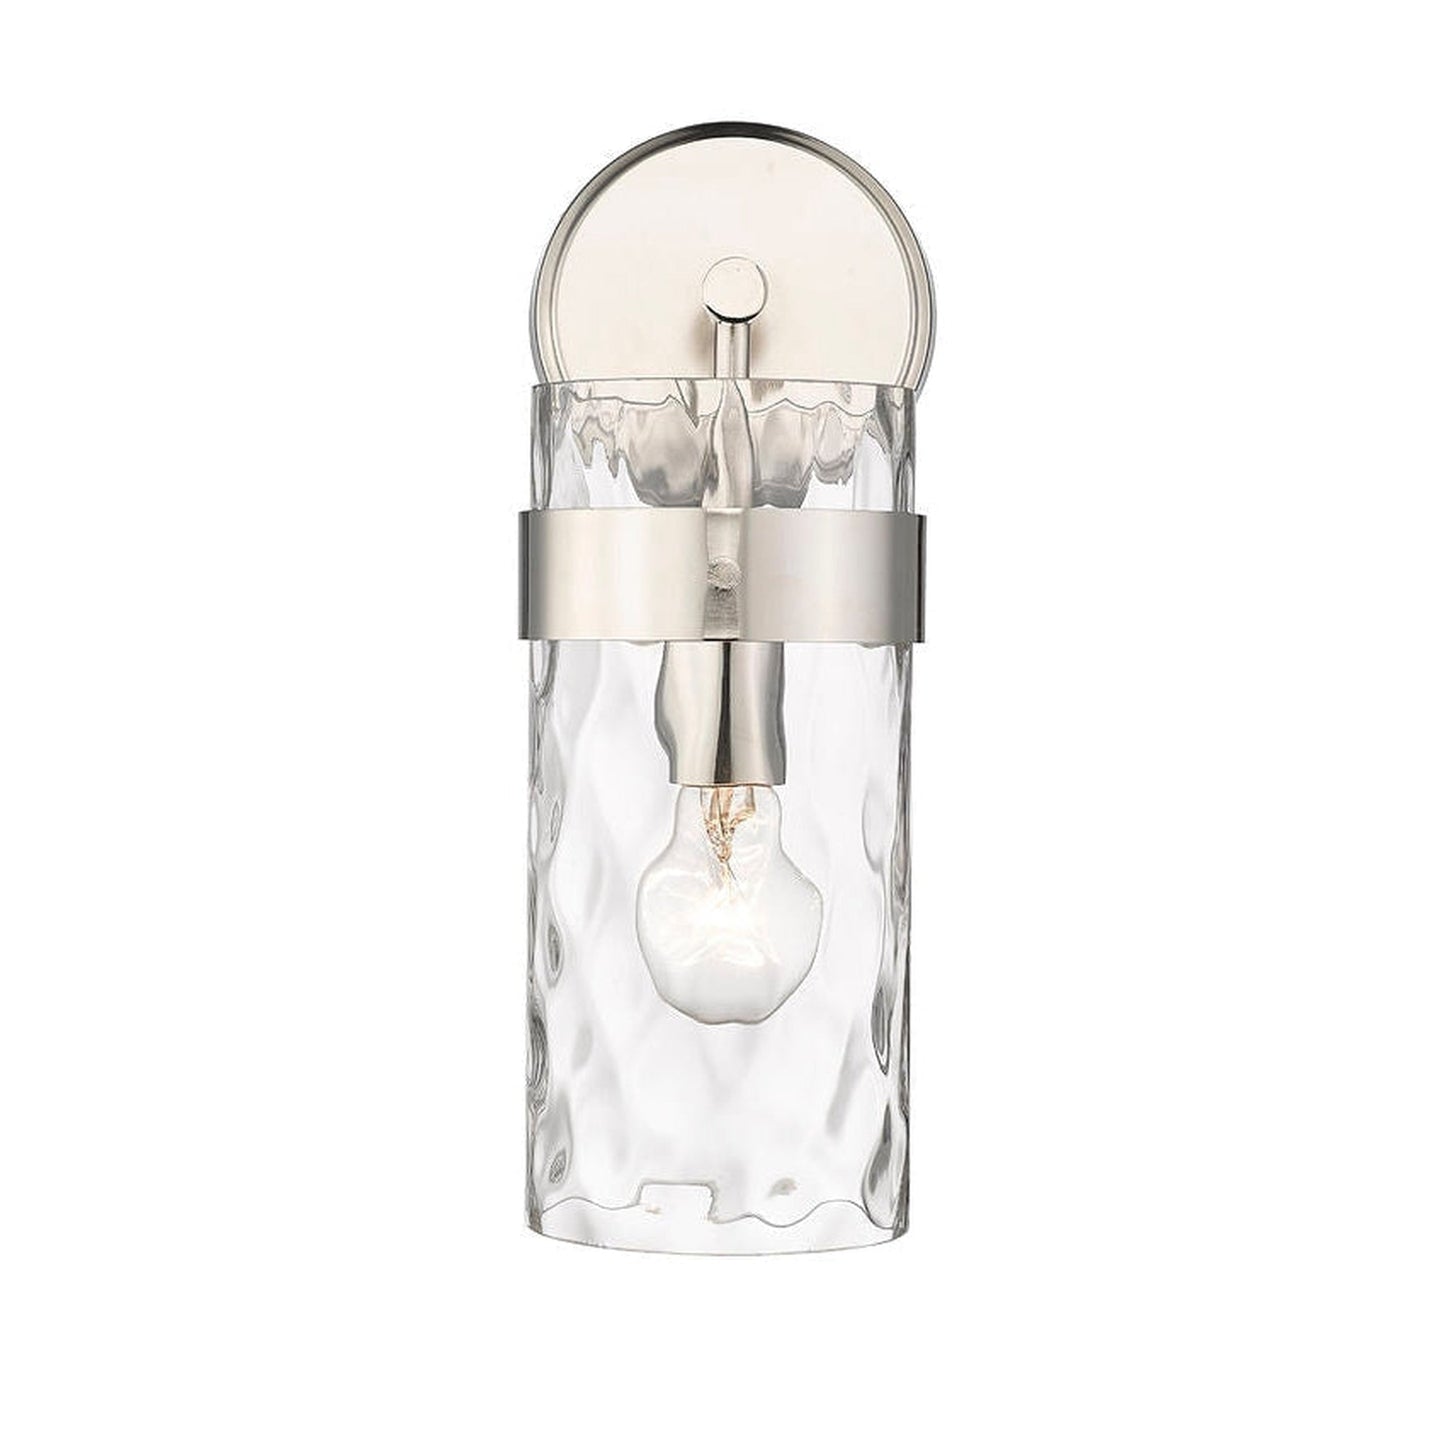 Z-Lite Fontaine 6" 1-Light Polished Nickel Wall Sconce With Clear Glass Shade